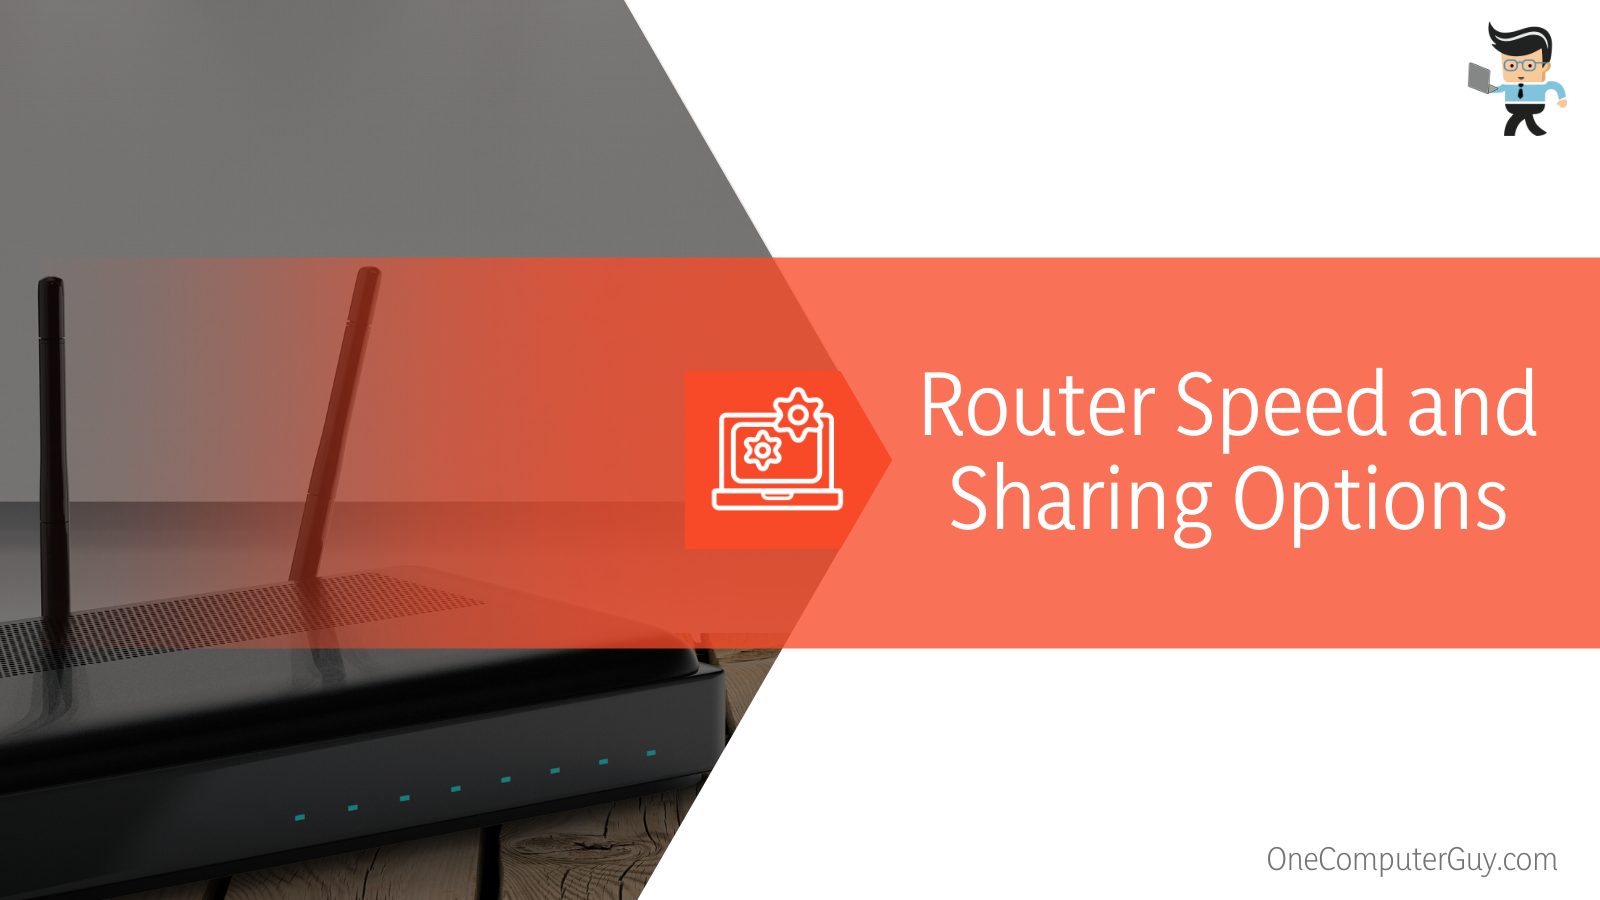 Router Speed and Sharing Options